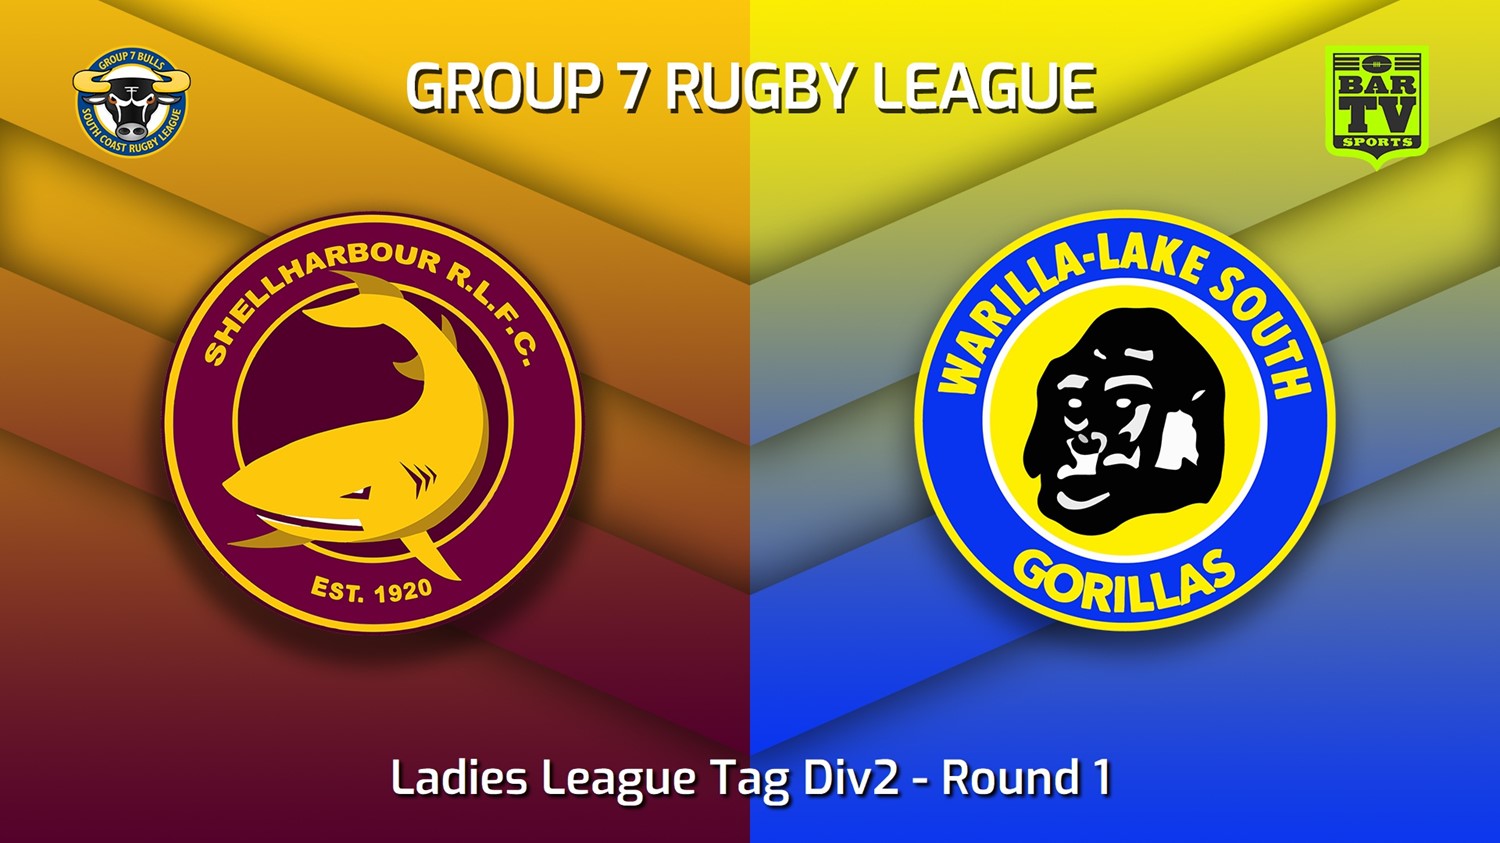 230326-South Coast Round 1 - Ladies League Tag Div2 - Shellharbour Sharks v Warilla-Lake South Gorillas Minigame Slate Image